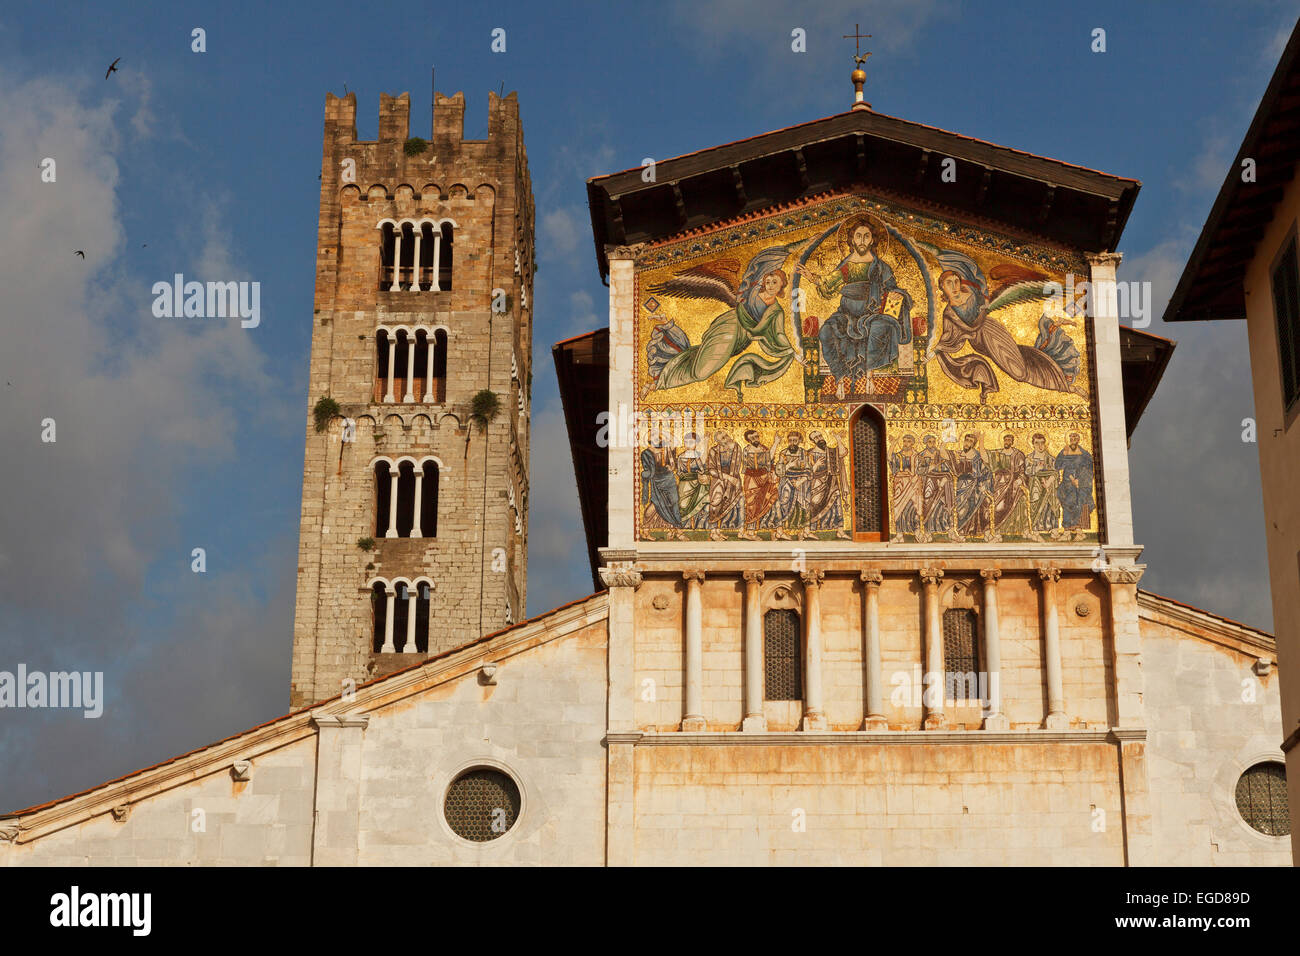 Monumantal golden mosaic of Christ with apostles and angels, Basilica di San Frediano, romanesque church, historic centre of  Lucca, UNESCO World Heritage Site, Lucca, Tuscany, Italy, Europe Stock Photo